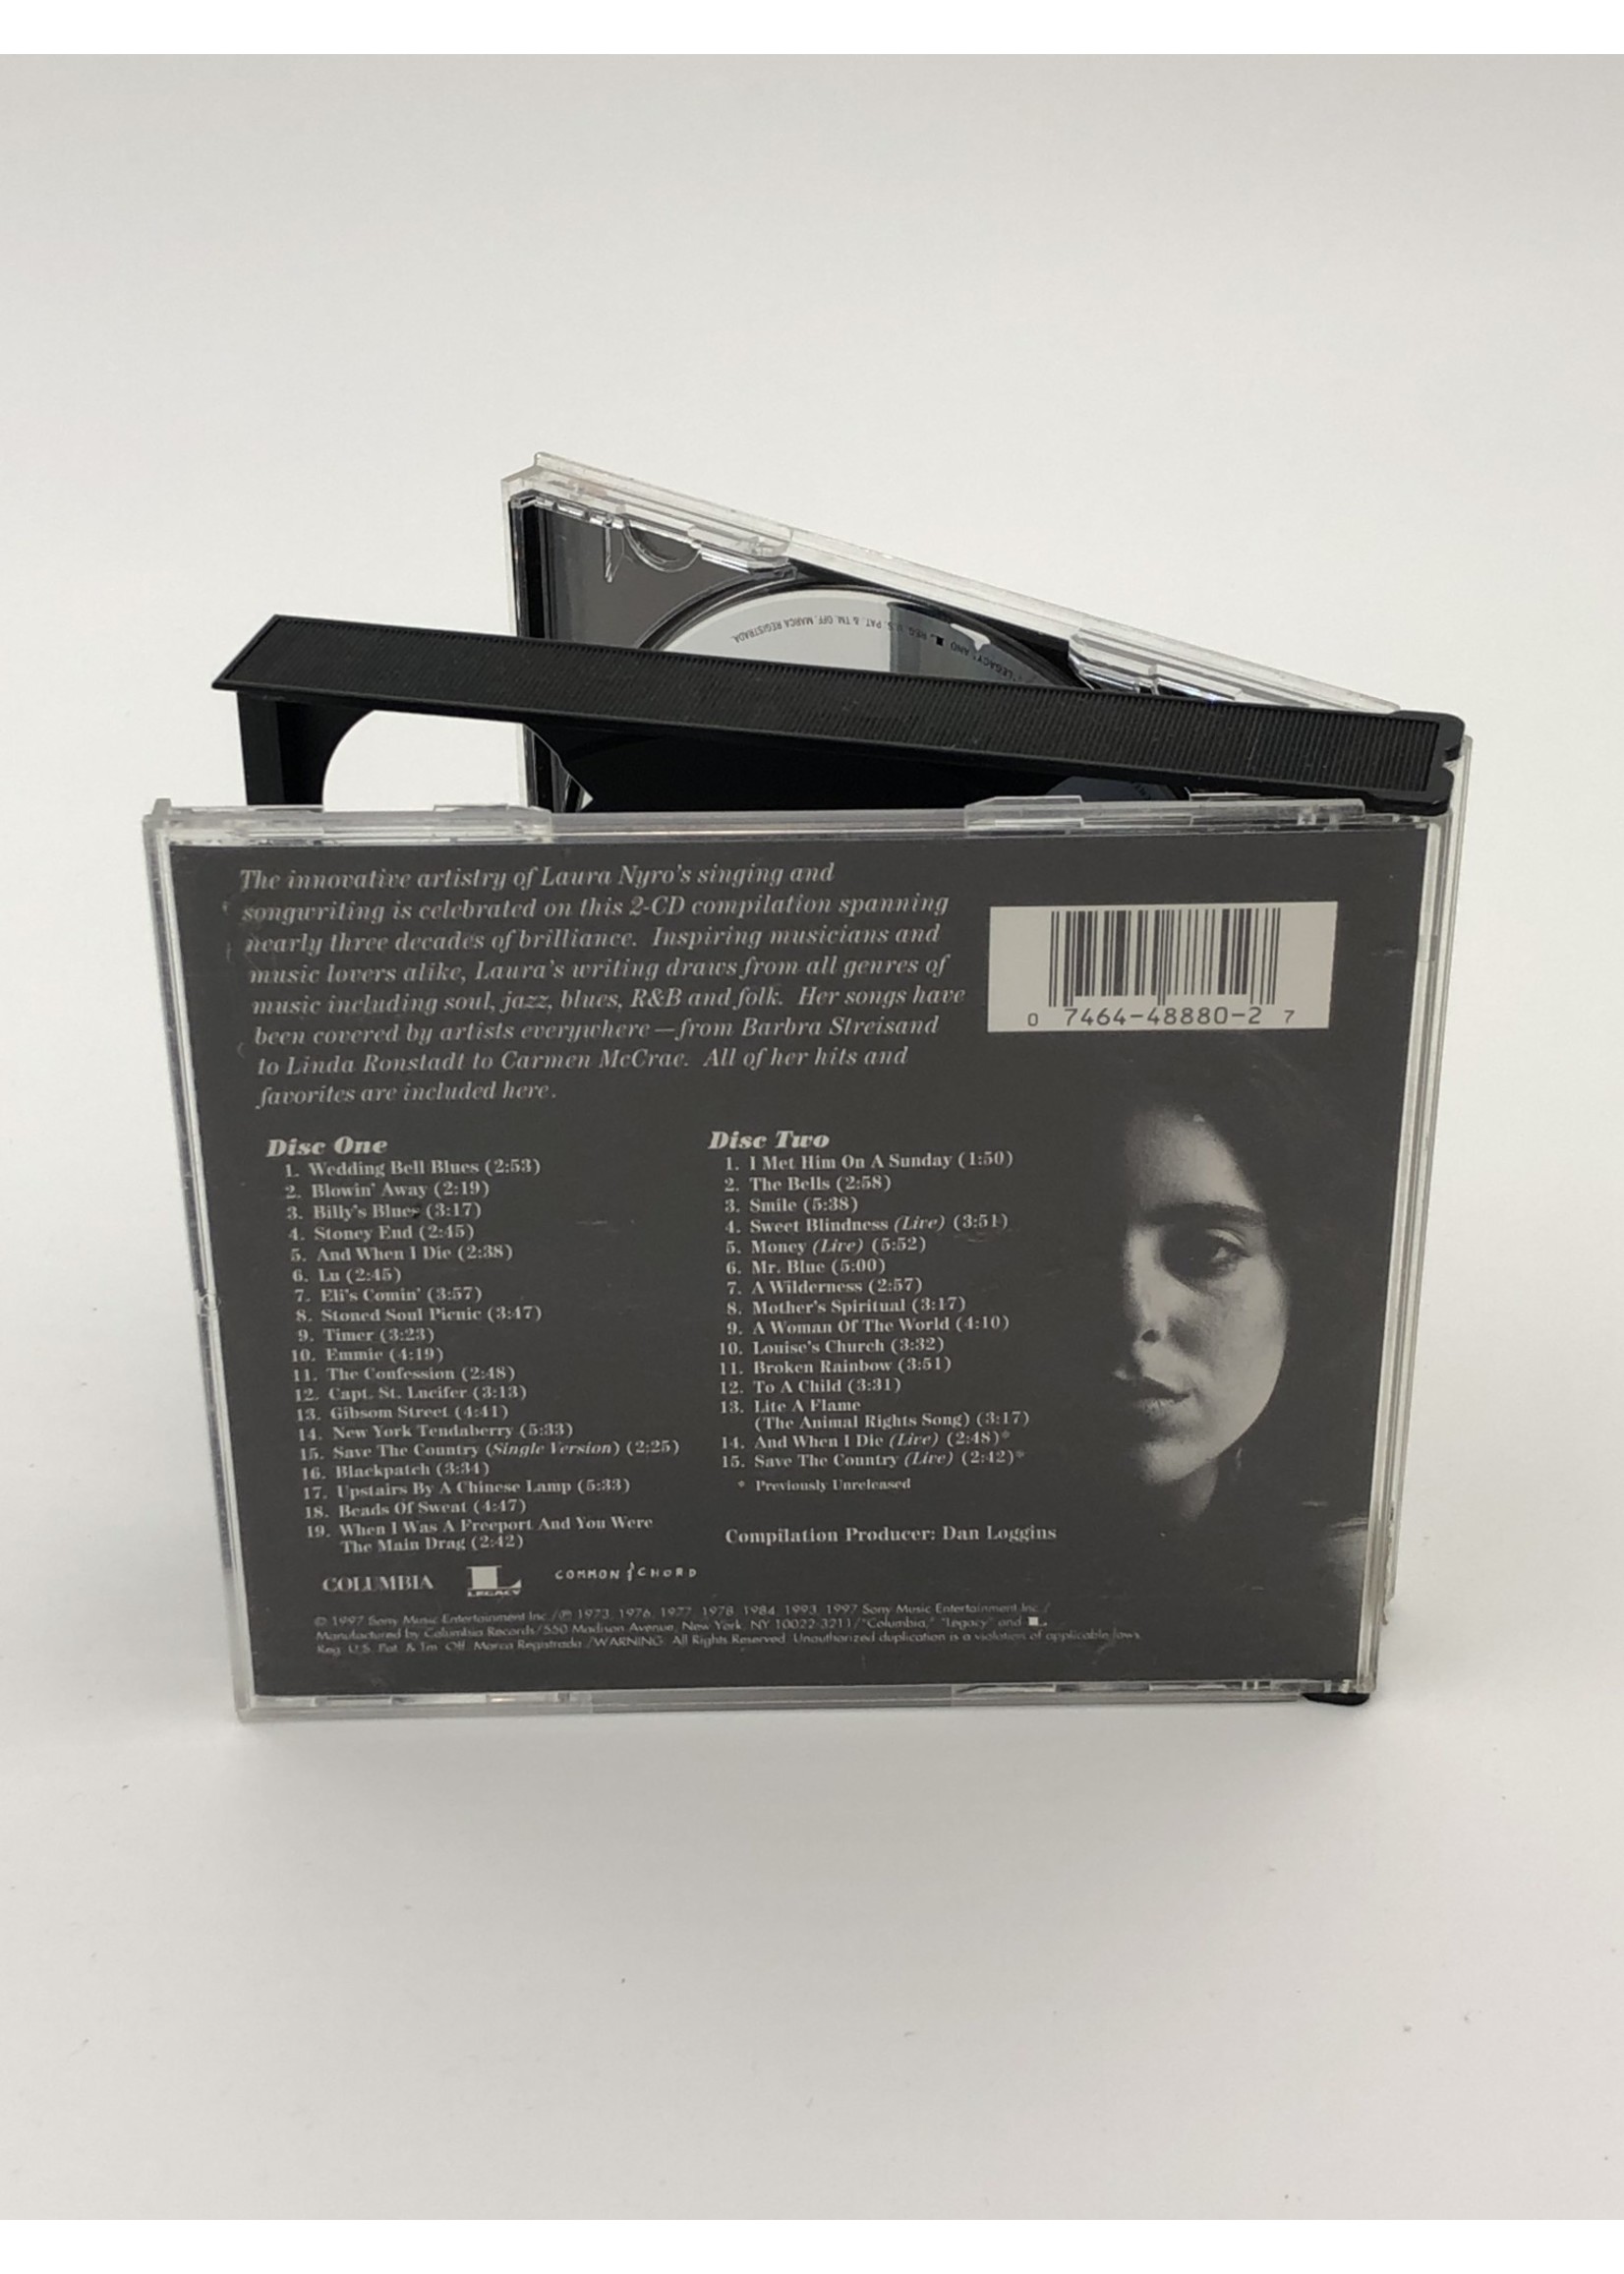 CD The Best of Laura Nyro Stoned Soul Picnic 2 CD